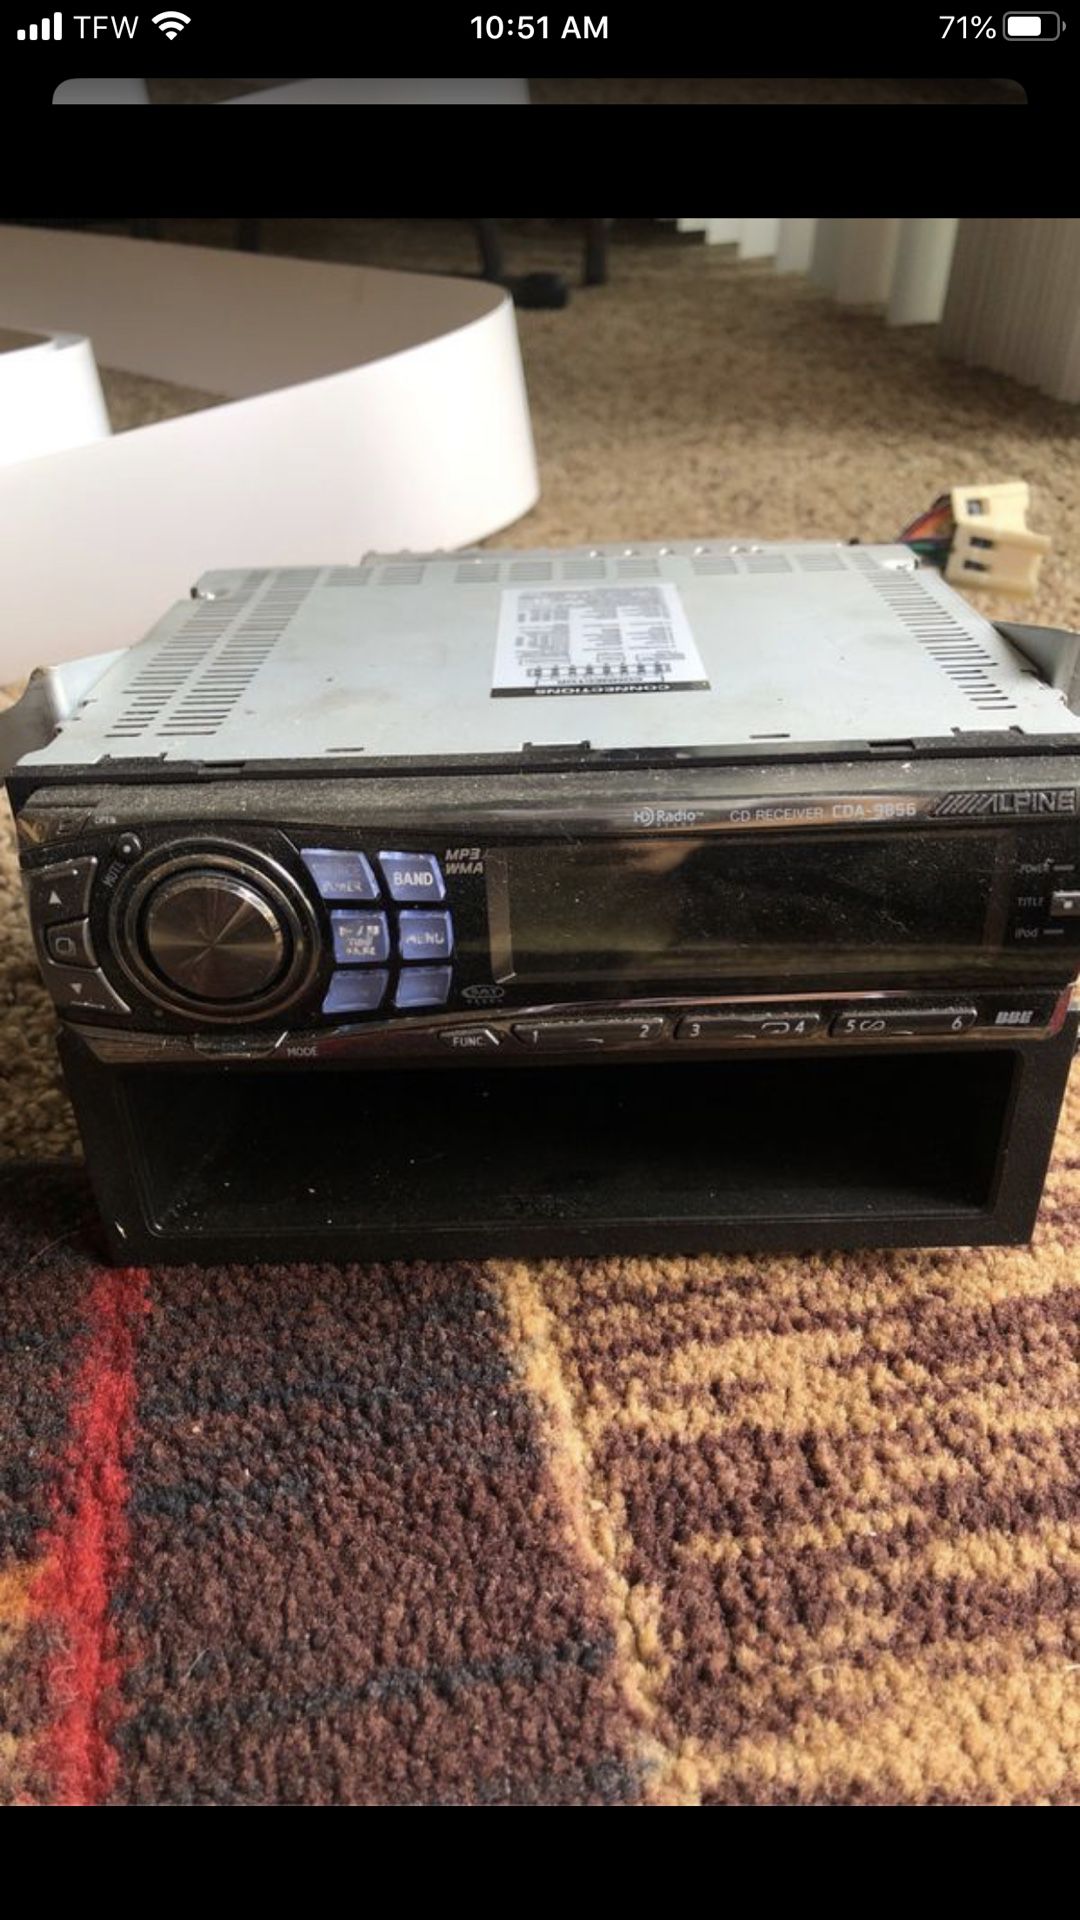 ILPINE CD Receiver/ stereo